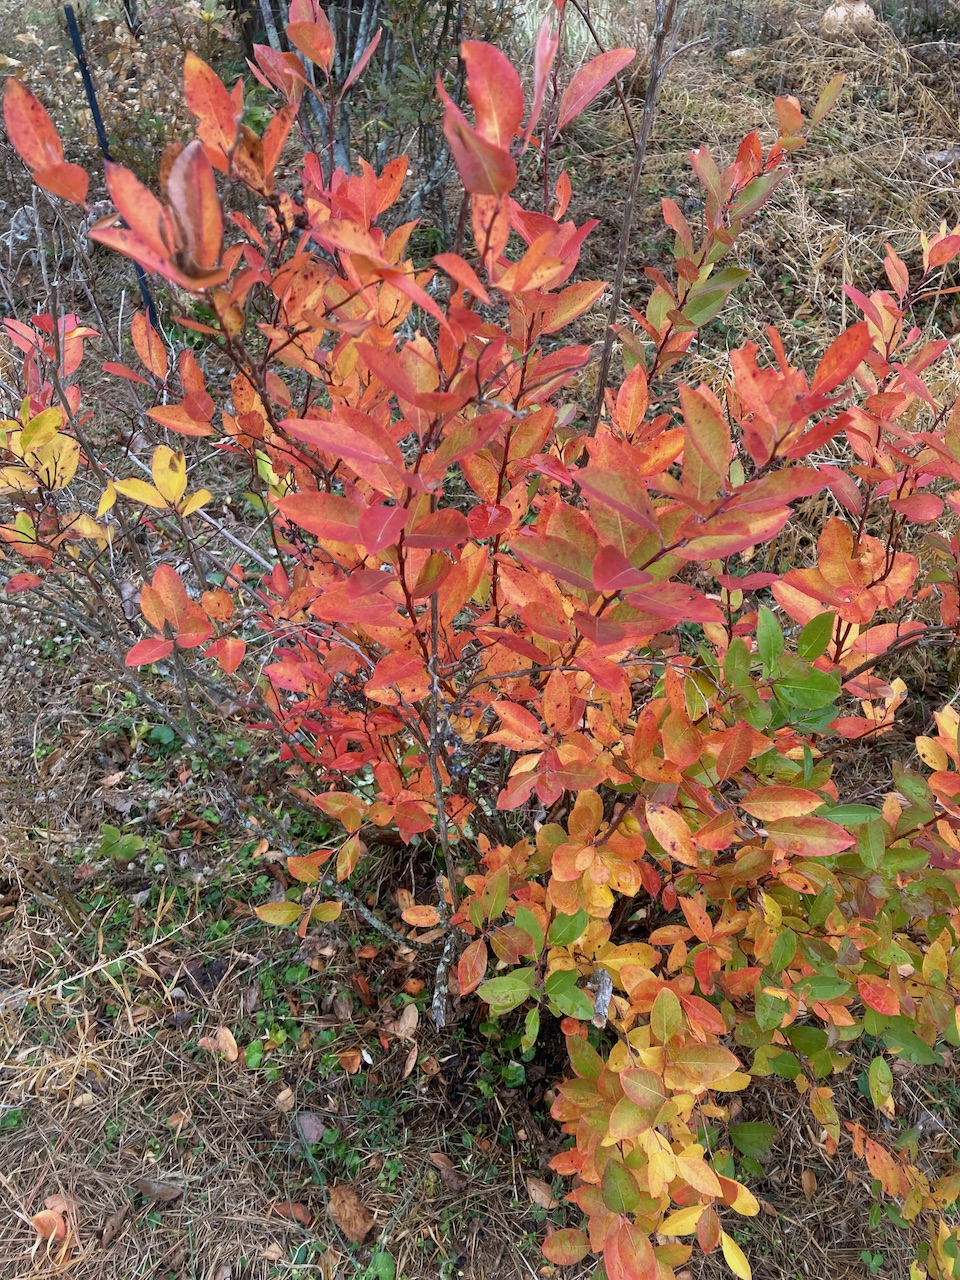 The Scientific Name is Zenobia pulverulenta. You will likely hear them called Zenobia, Honey-cups, Honeycup, . This picture shows the Multiple leaf colors occur simultaneously on the senescing shrub in early December. of Zenobia pulverulenta